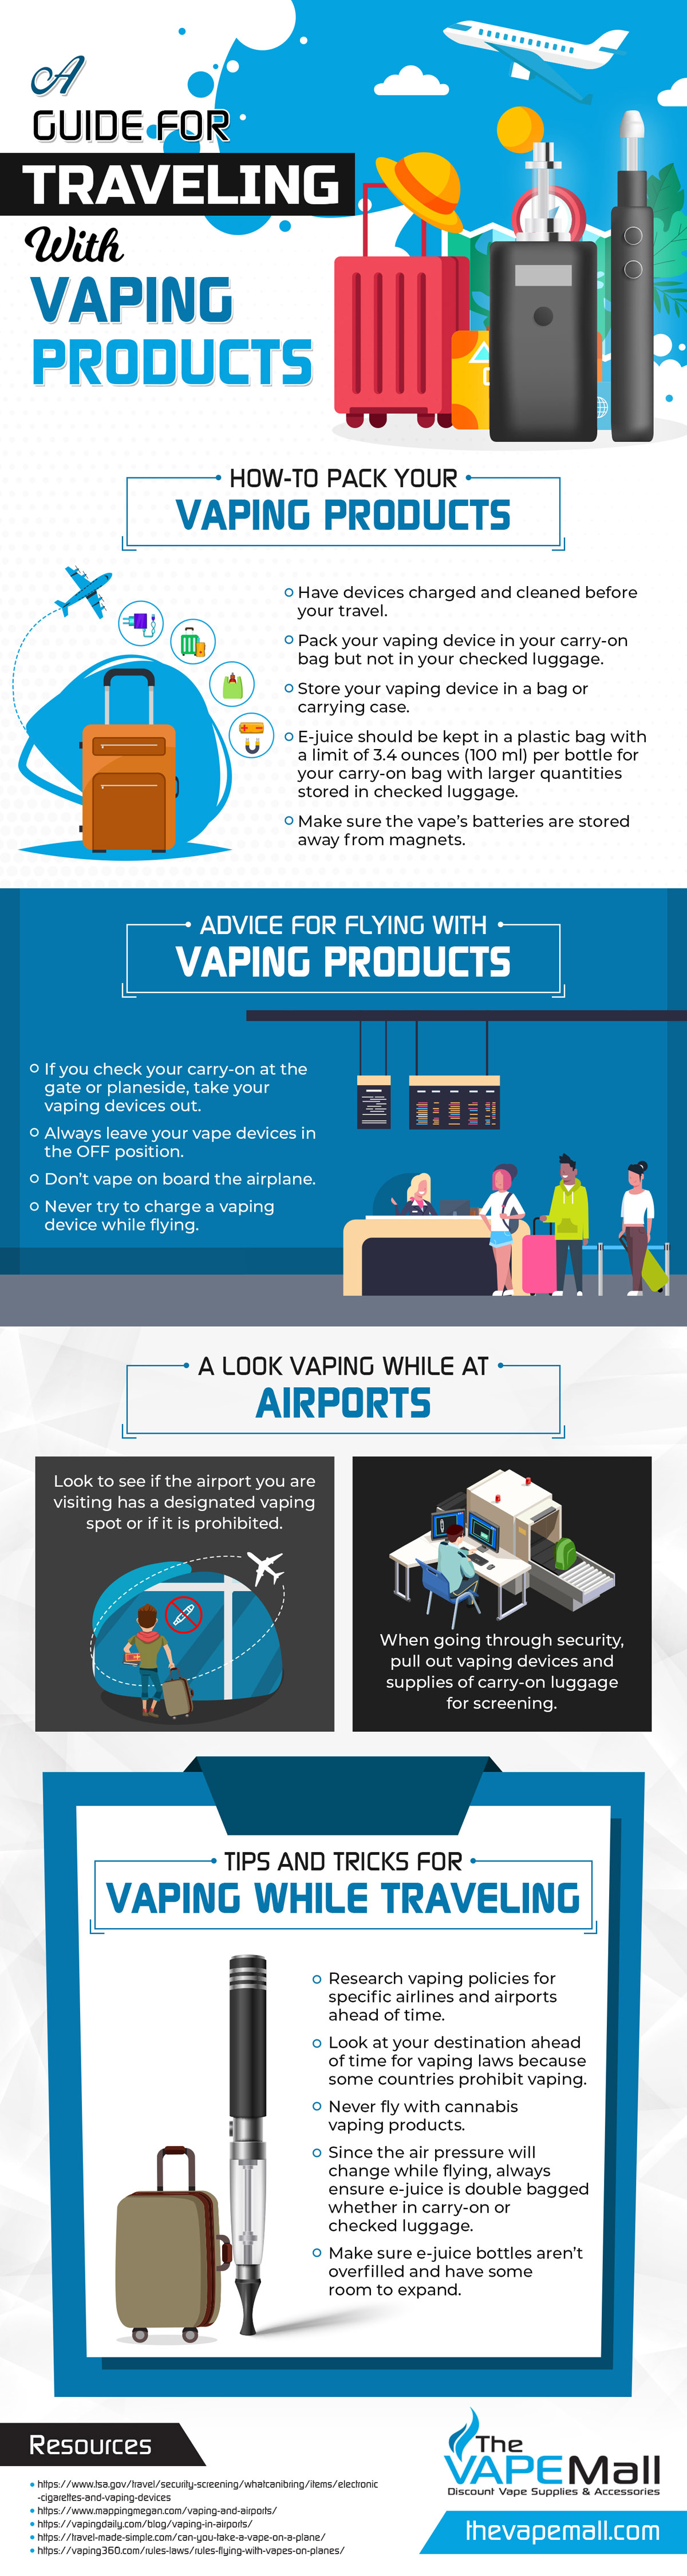 A Guide for Traveling With Vaping Products